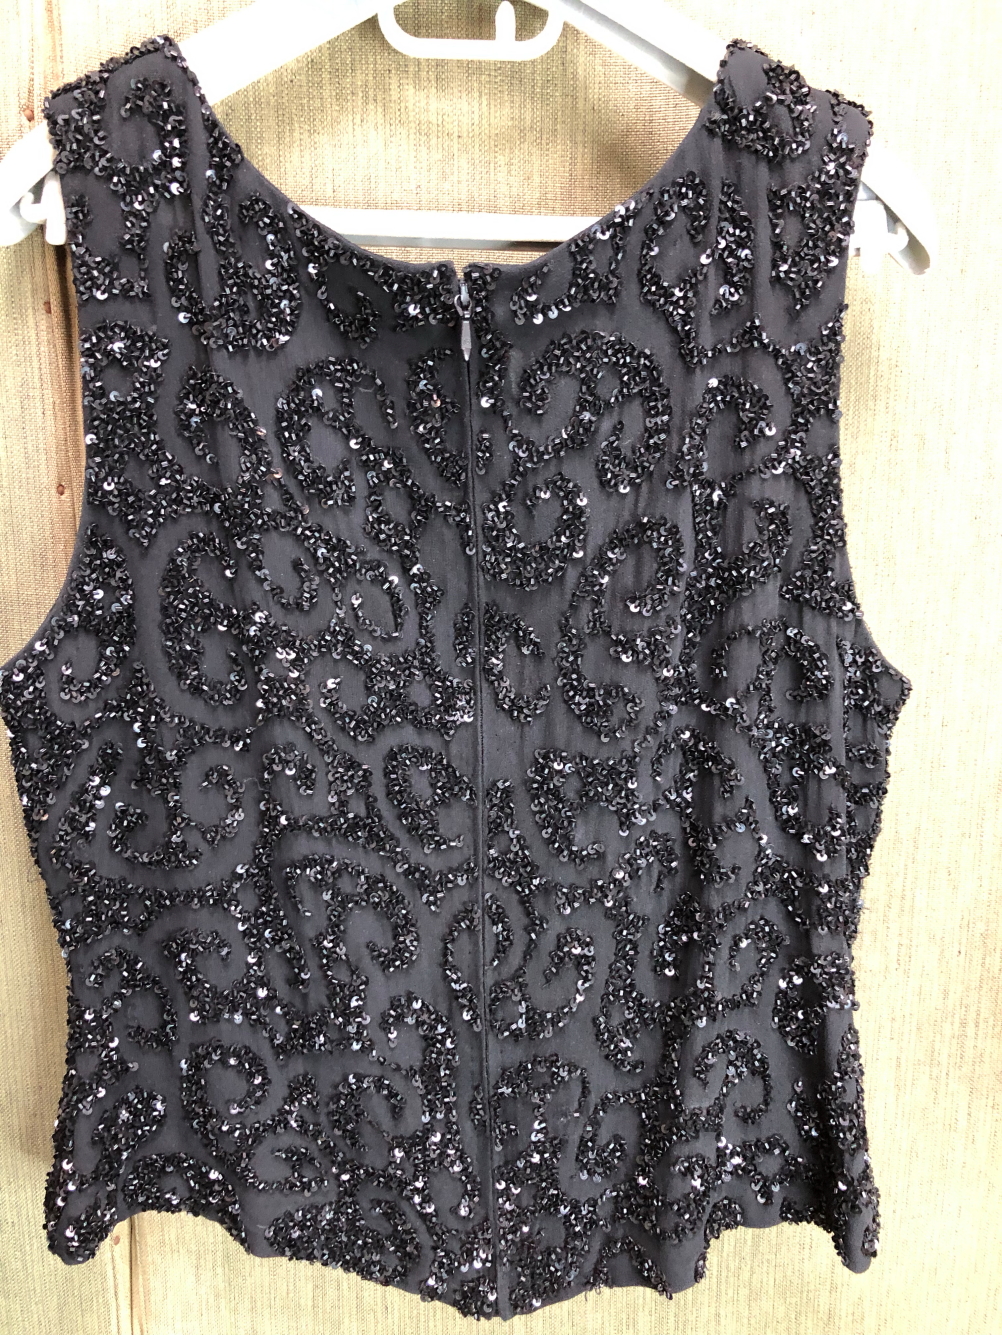 A ELLA SINGH BLACK SEQUIN JACKET SIZE 42 AND MATCHING VEST TOP SIZE 40 - Image 7 of 7